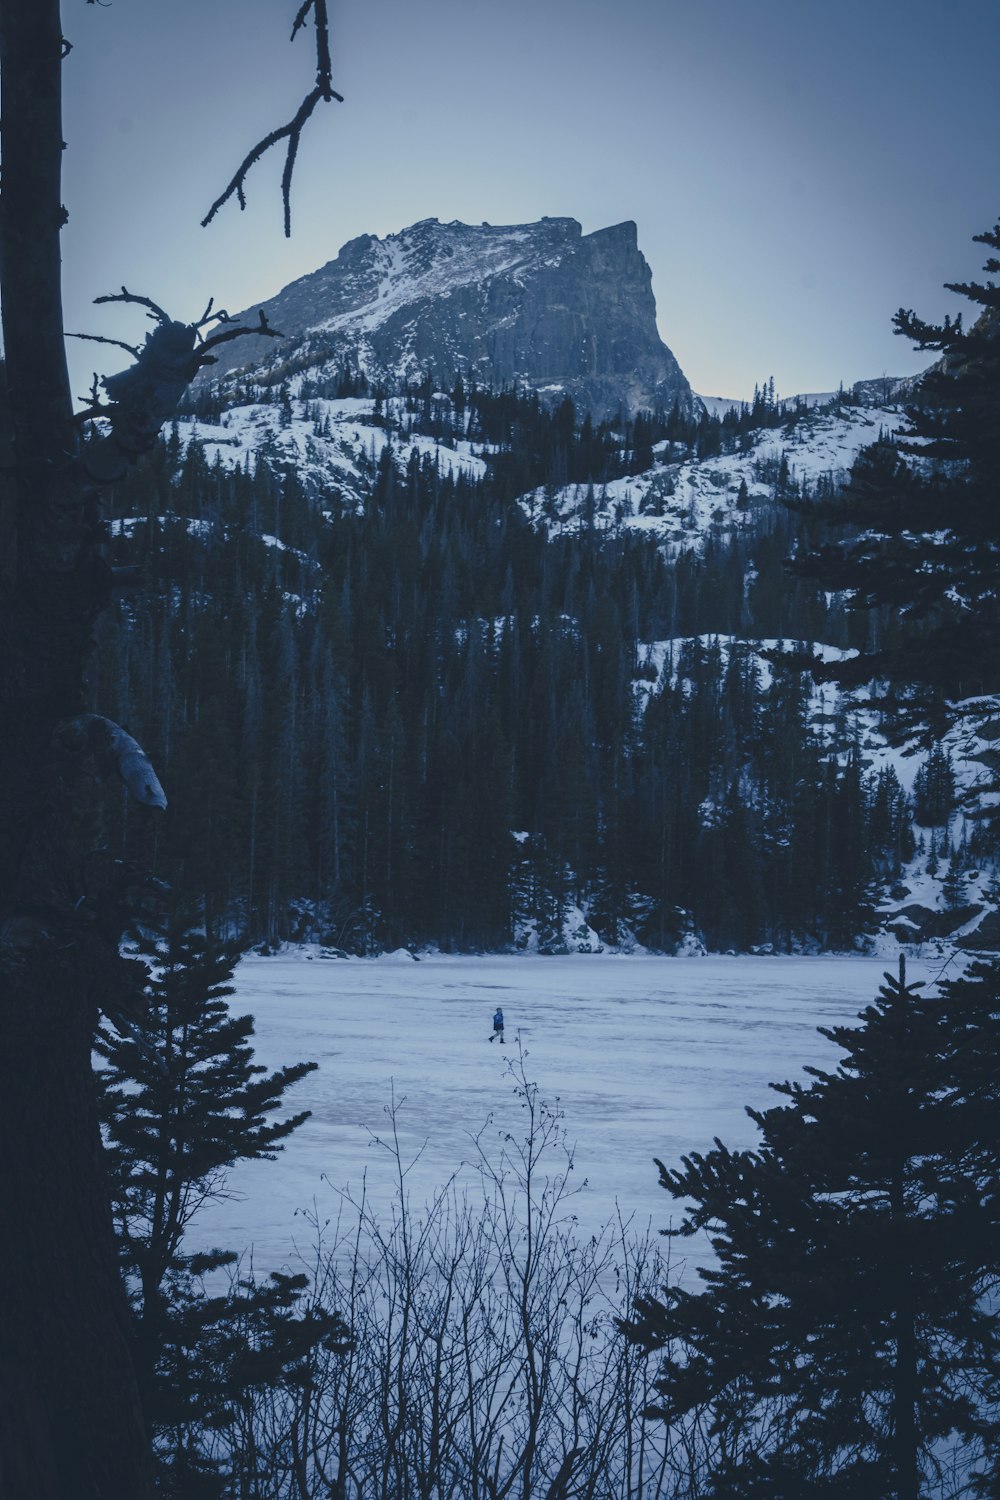 a person is skiing in the snow near a mountain